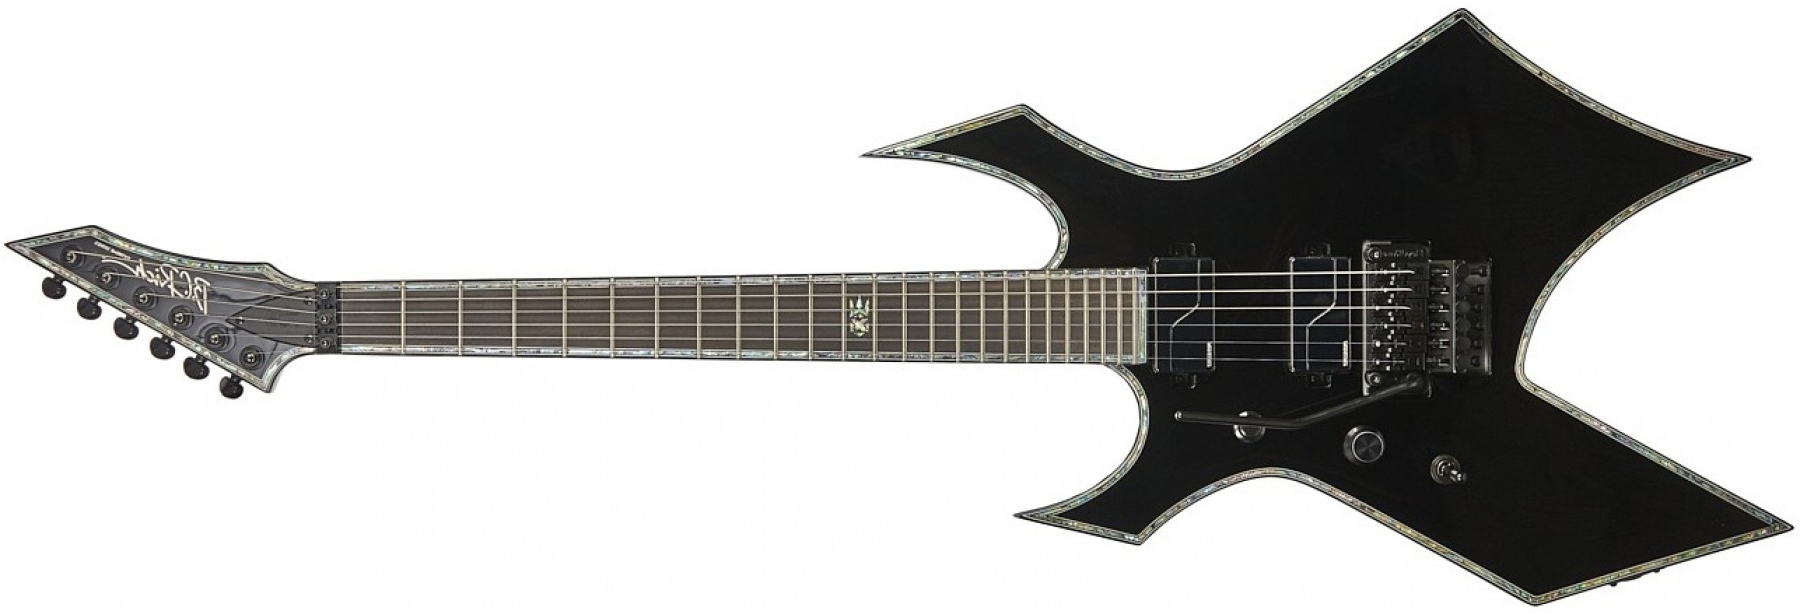 Bc rich bass left handed